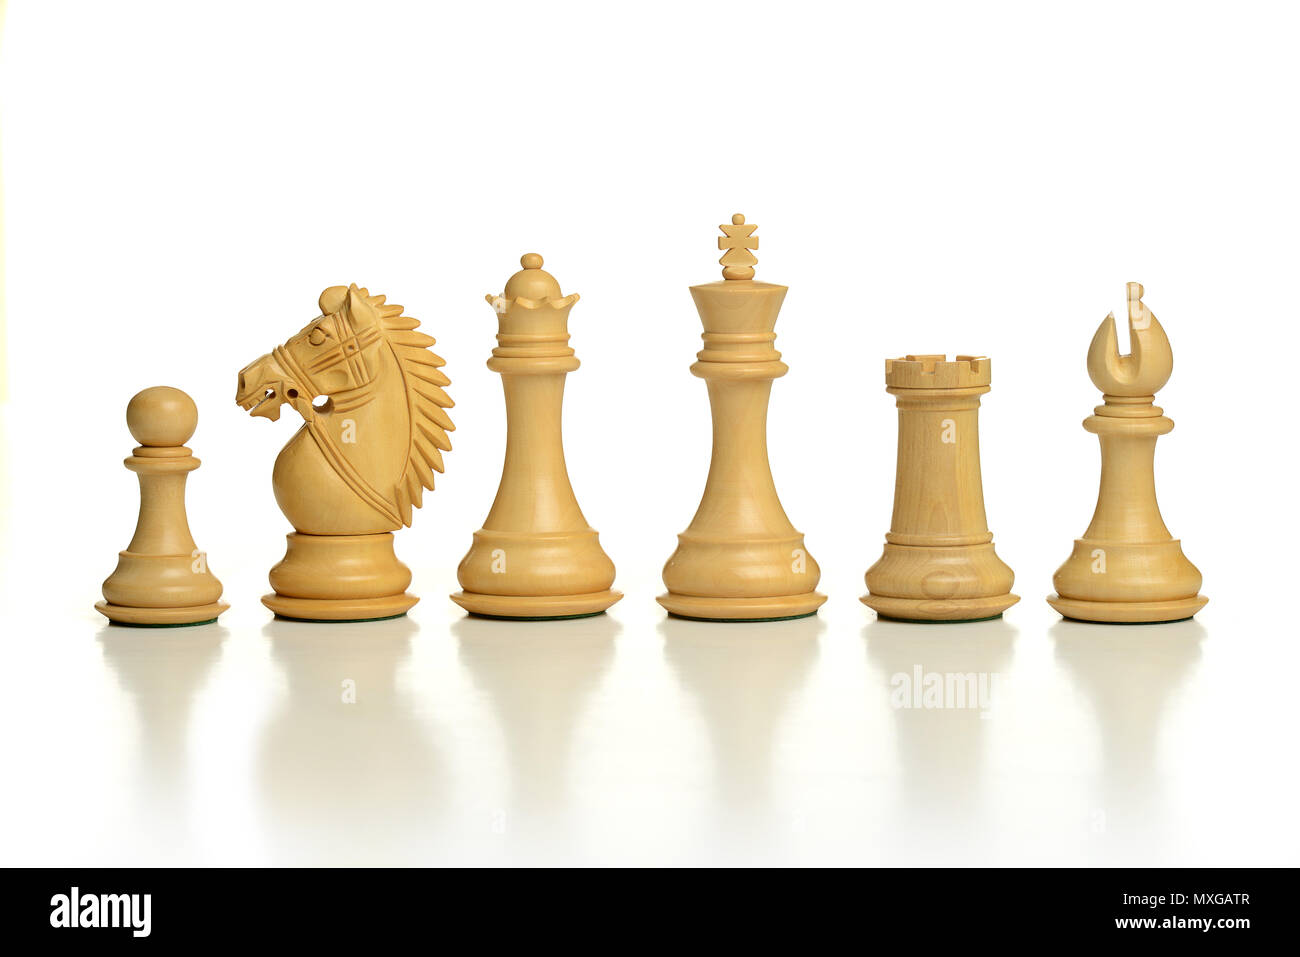 File:AAA SVG Chessboard and chess pieces 06.svg - Wikimedia Commons